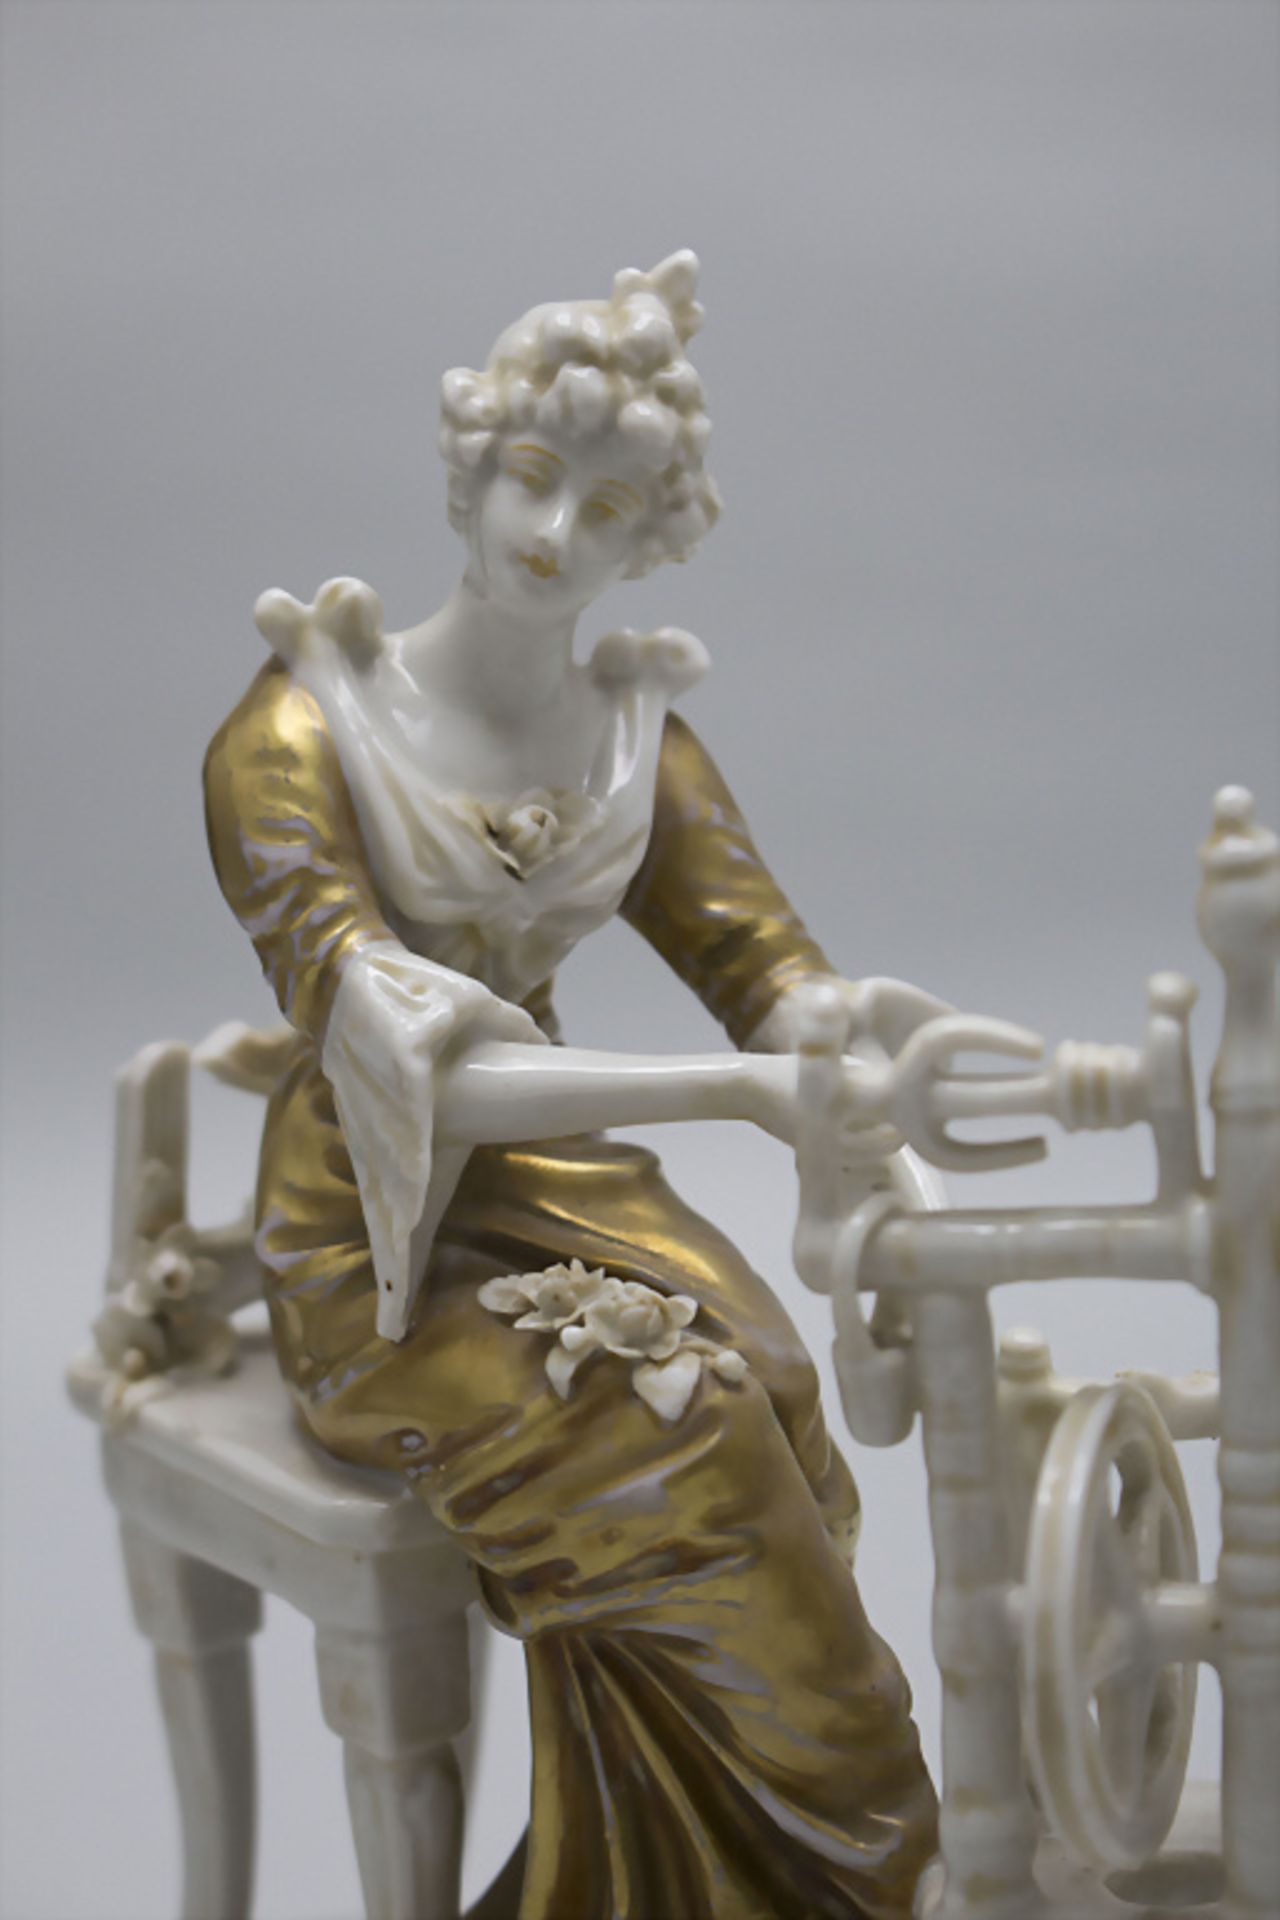 Junge Dame am Spinnrad / A young woman on a spinning wheel, wohl deutsch, um 1900 - Image 3 of 4